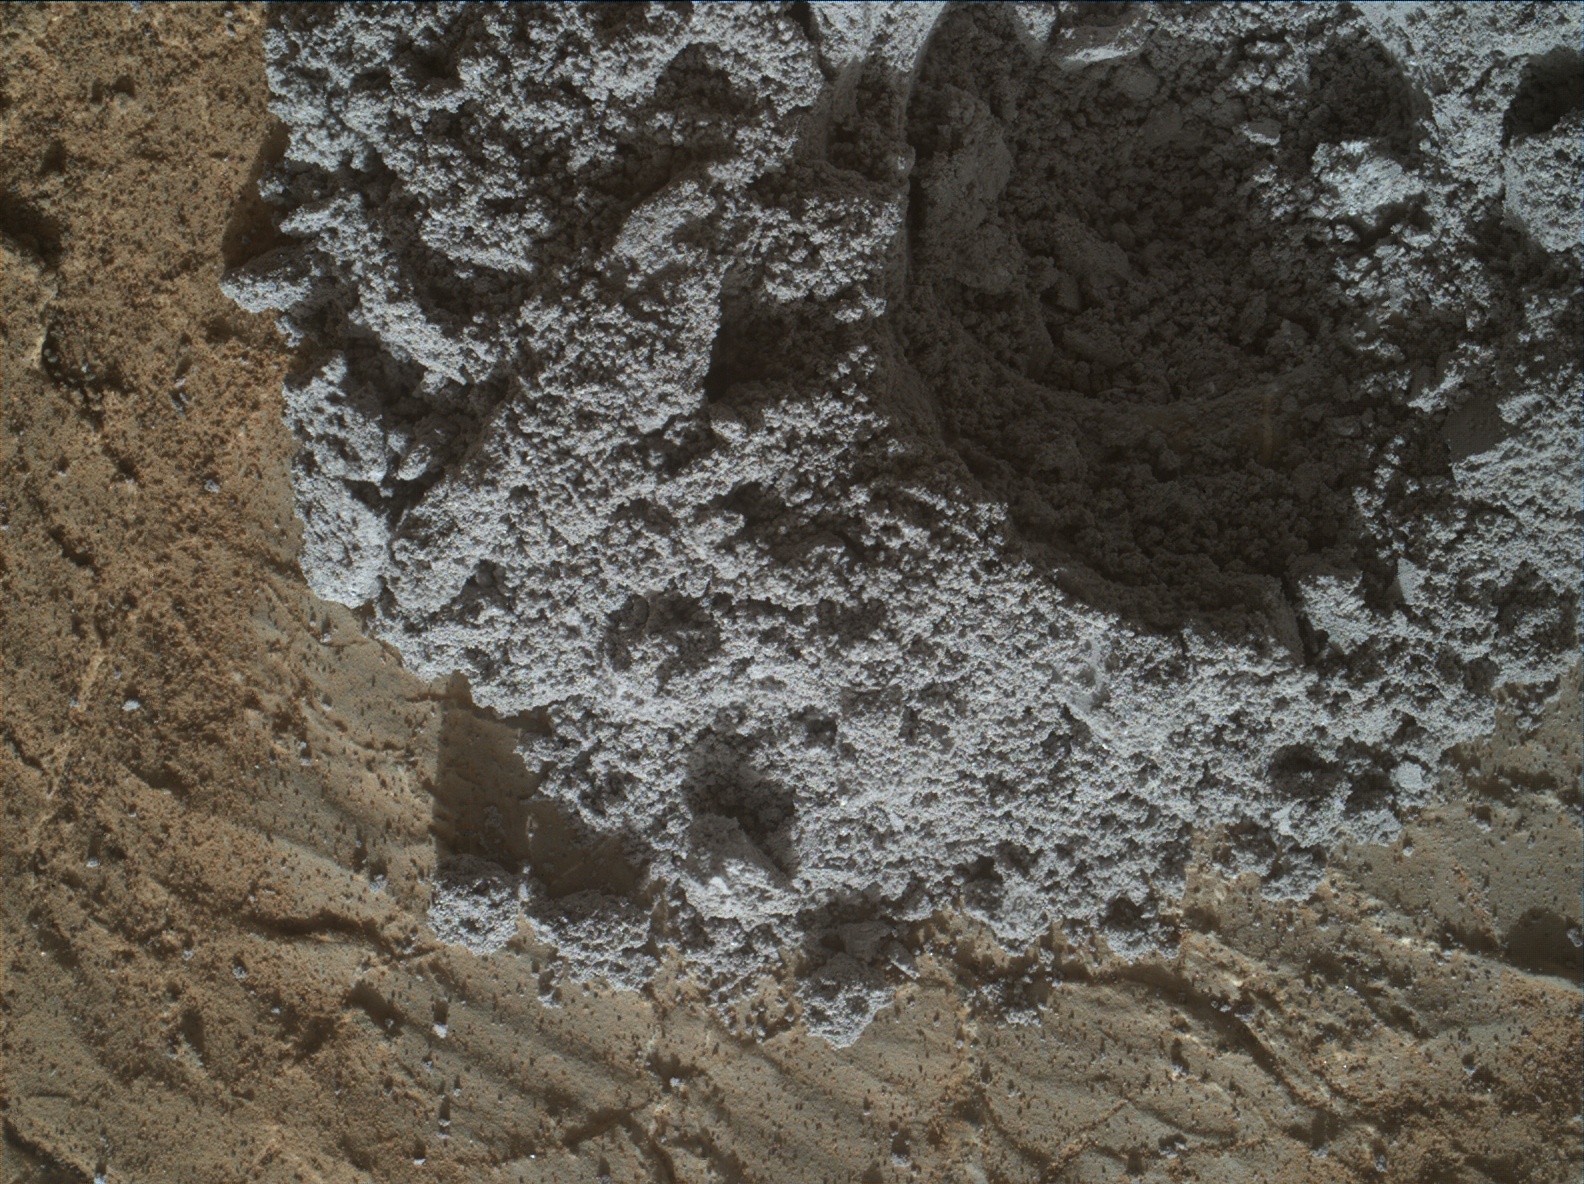 Nasa's Mars rover Curiosity acquired this image using its Mars Hand Lens Imager (MAHLI) on Sol 1978